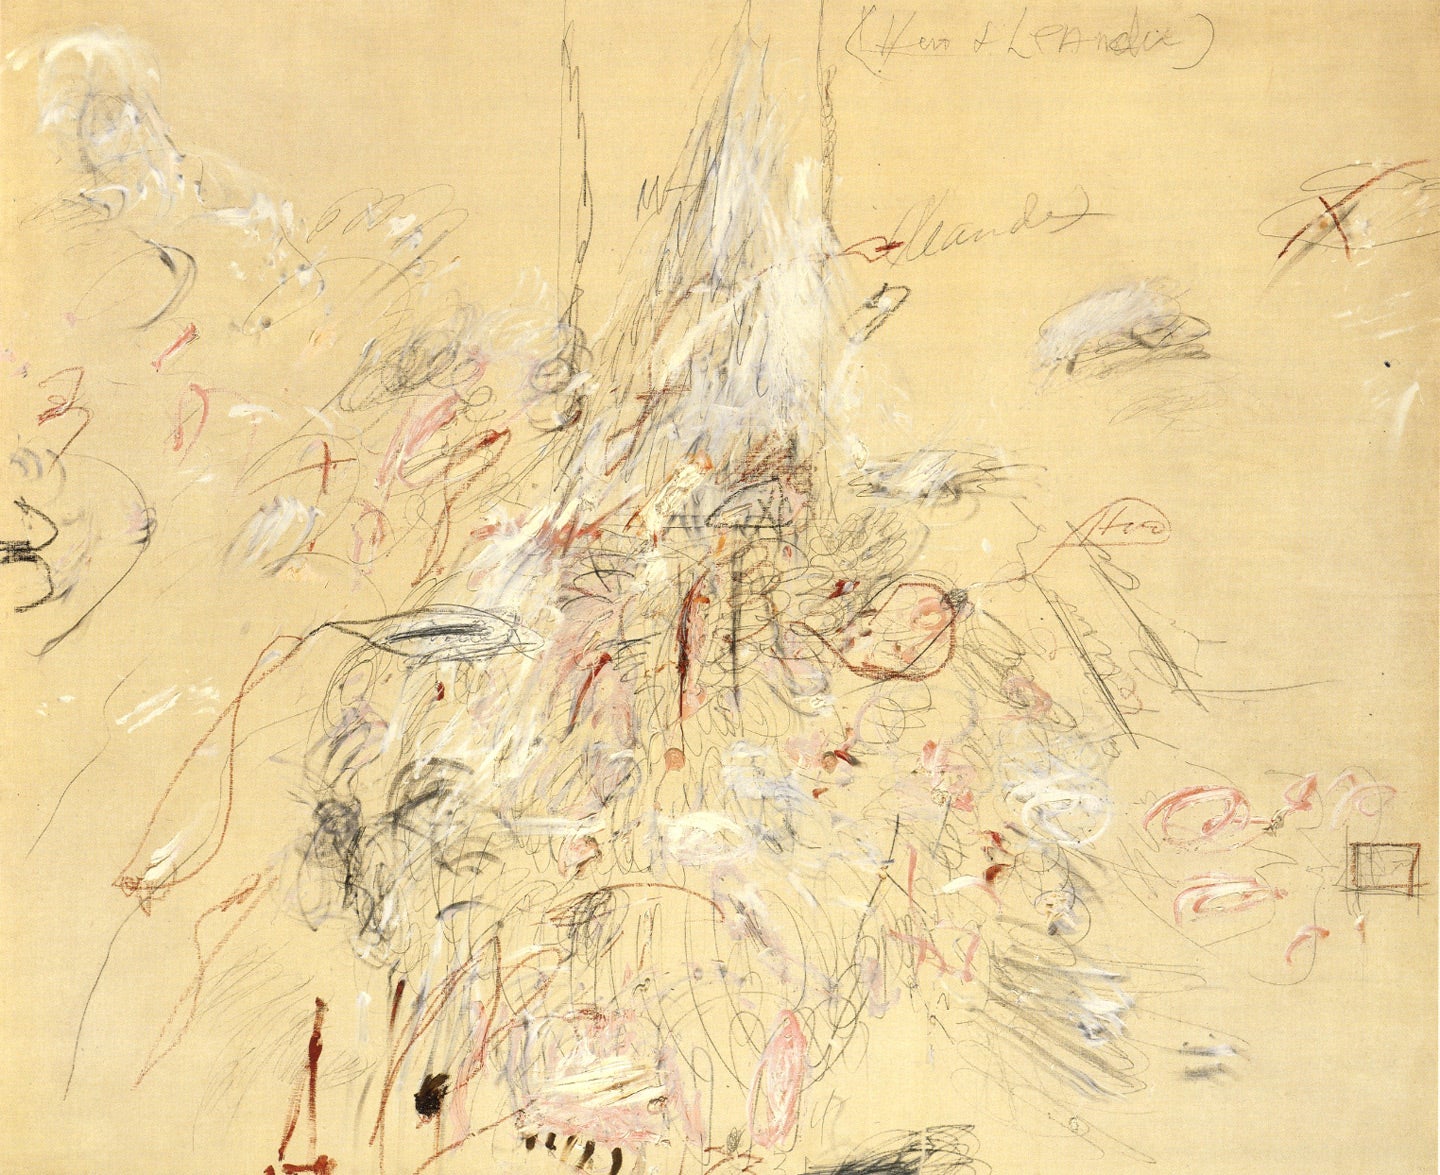 Audible Silence: Cy Twombly at Daros